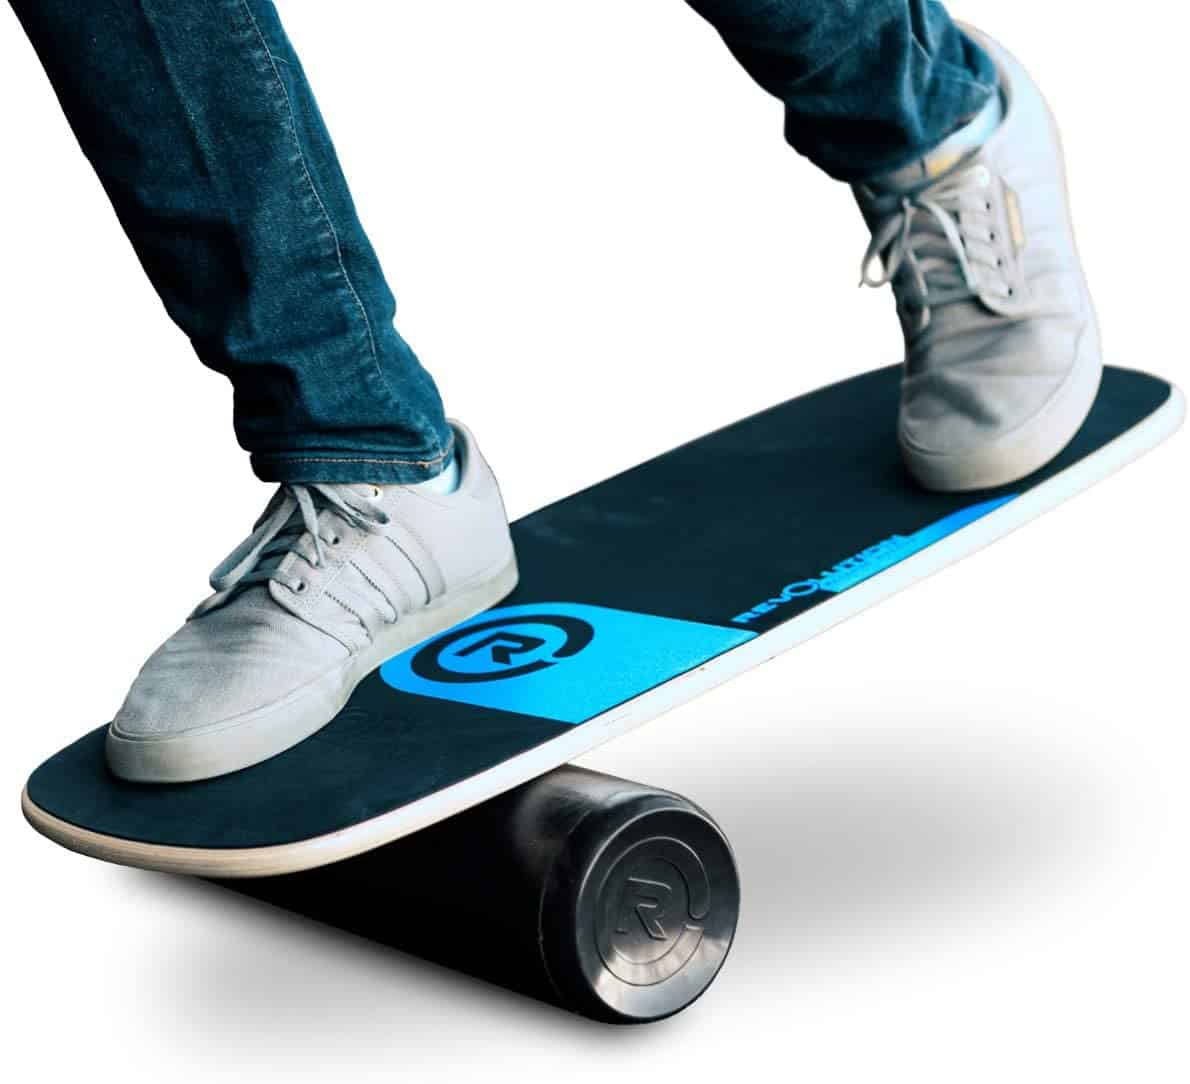 Best Balance Game for 6 Year Old: Revolution 101 Balance Board Trainer